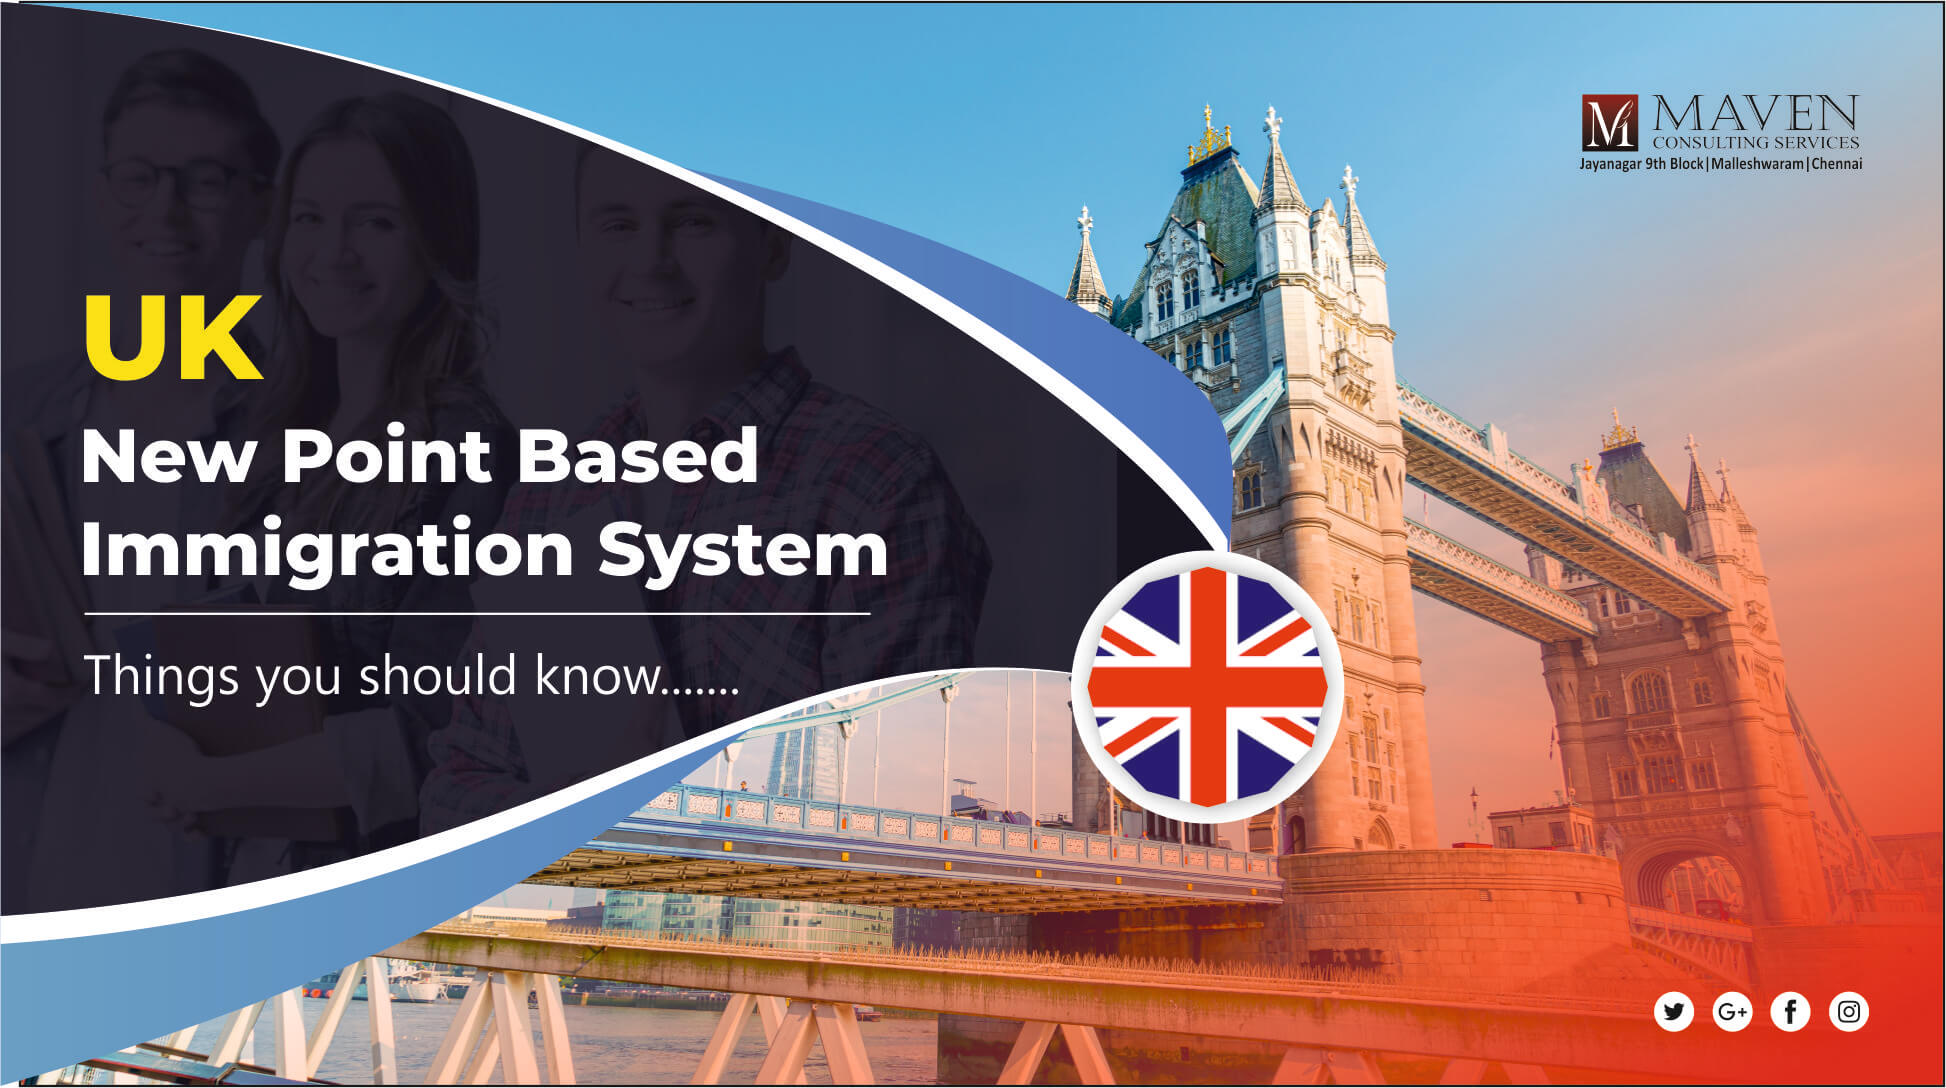 UK New Point Based Immigration System